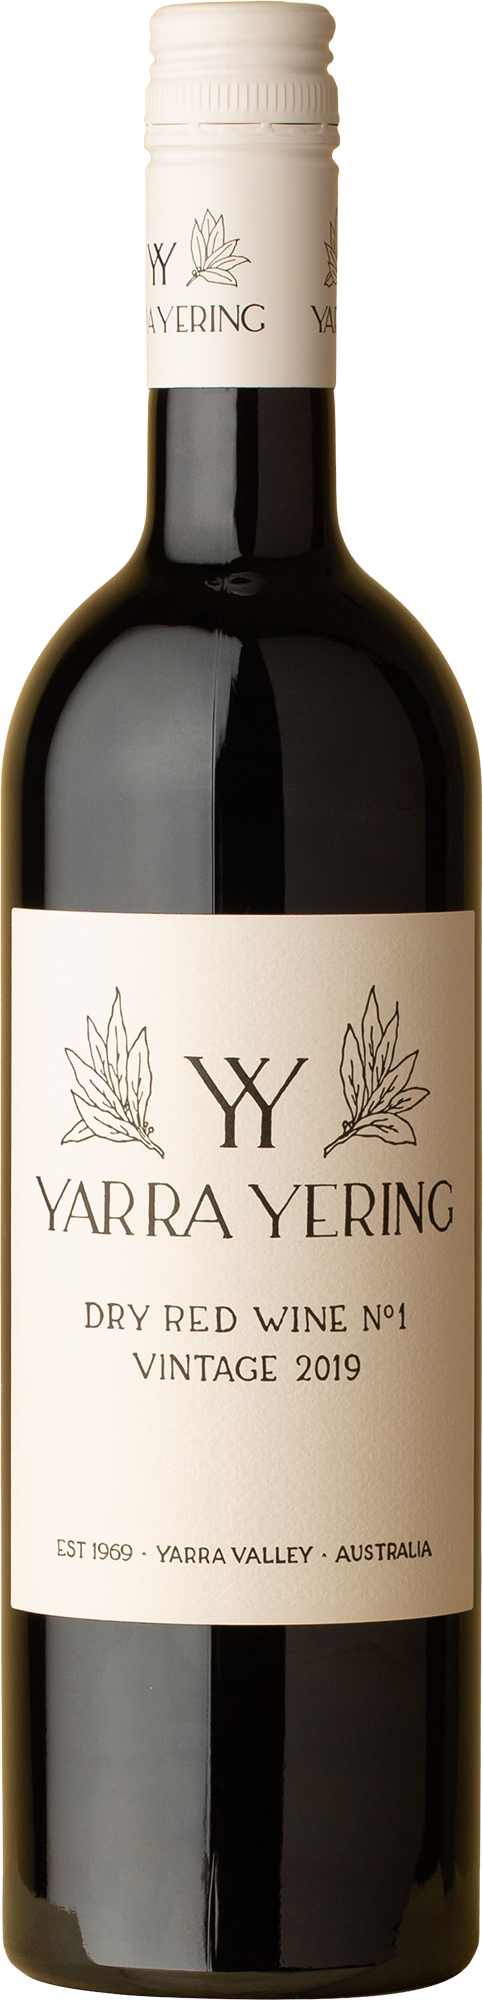 Yarra Yering - Dry Red No.1 Red Blend 2019 Red Wine